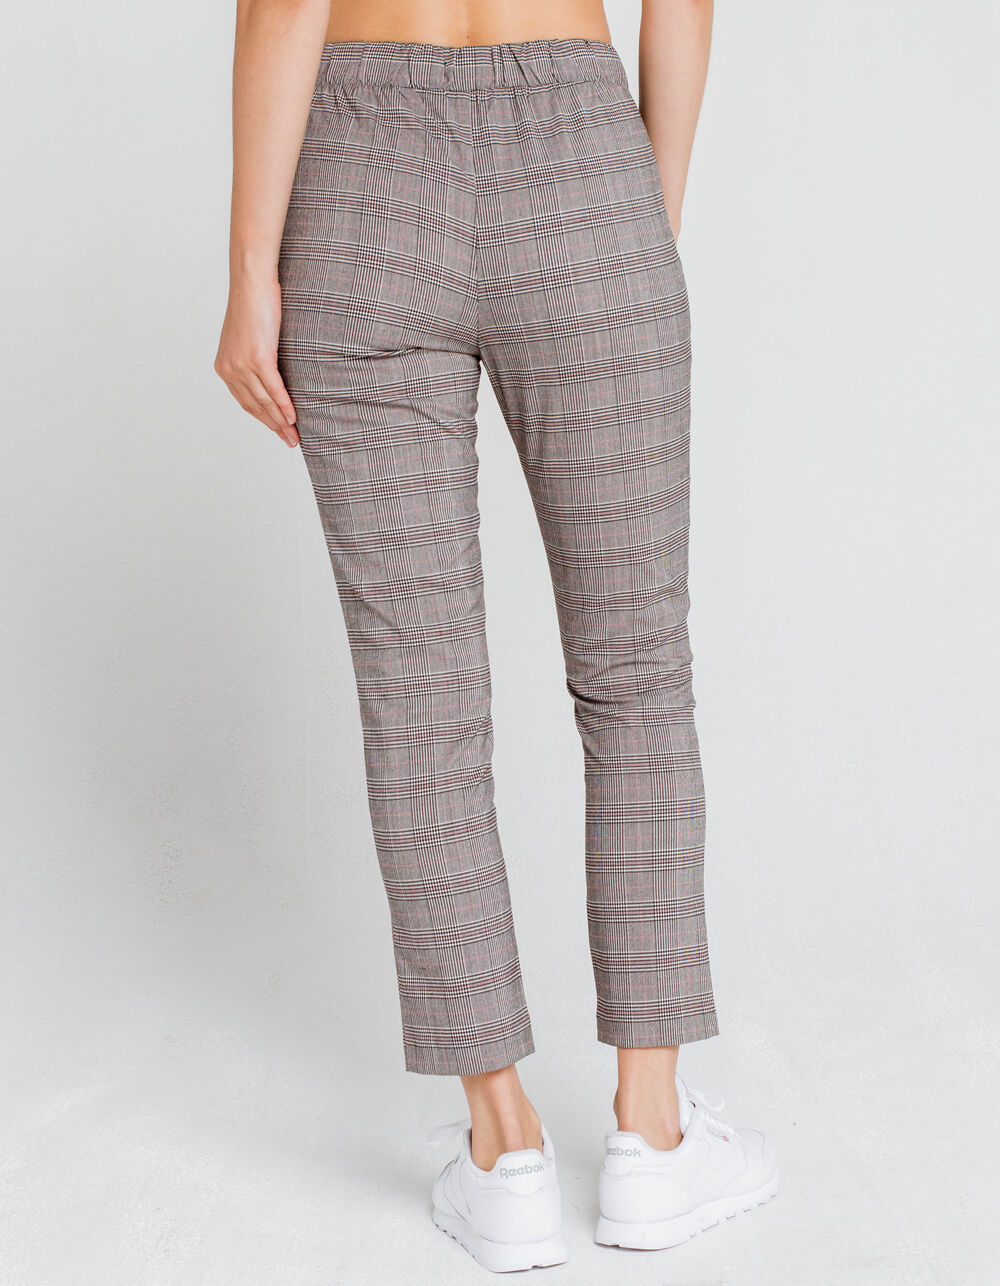 SKY AND SPARROW Plaid Womens Pants - GRAY COMBO | Tillys